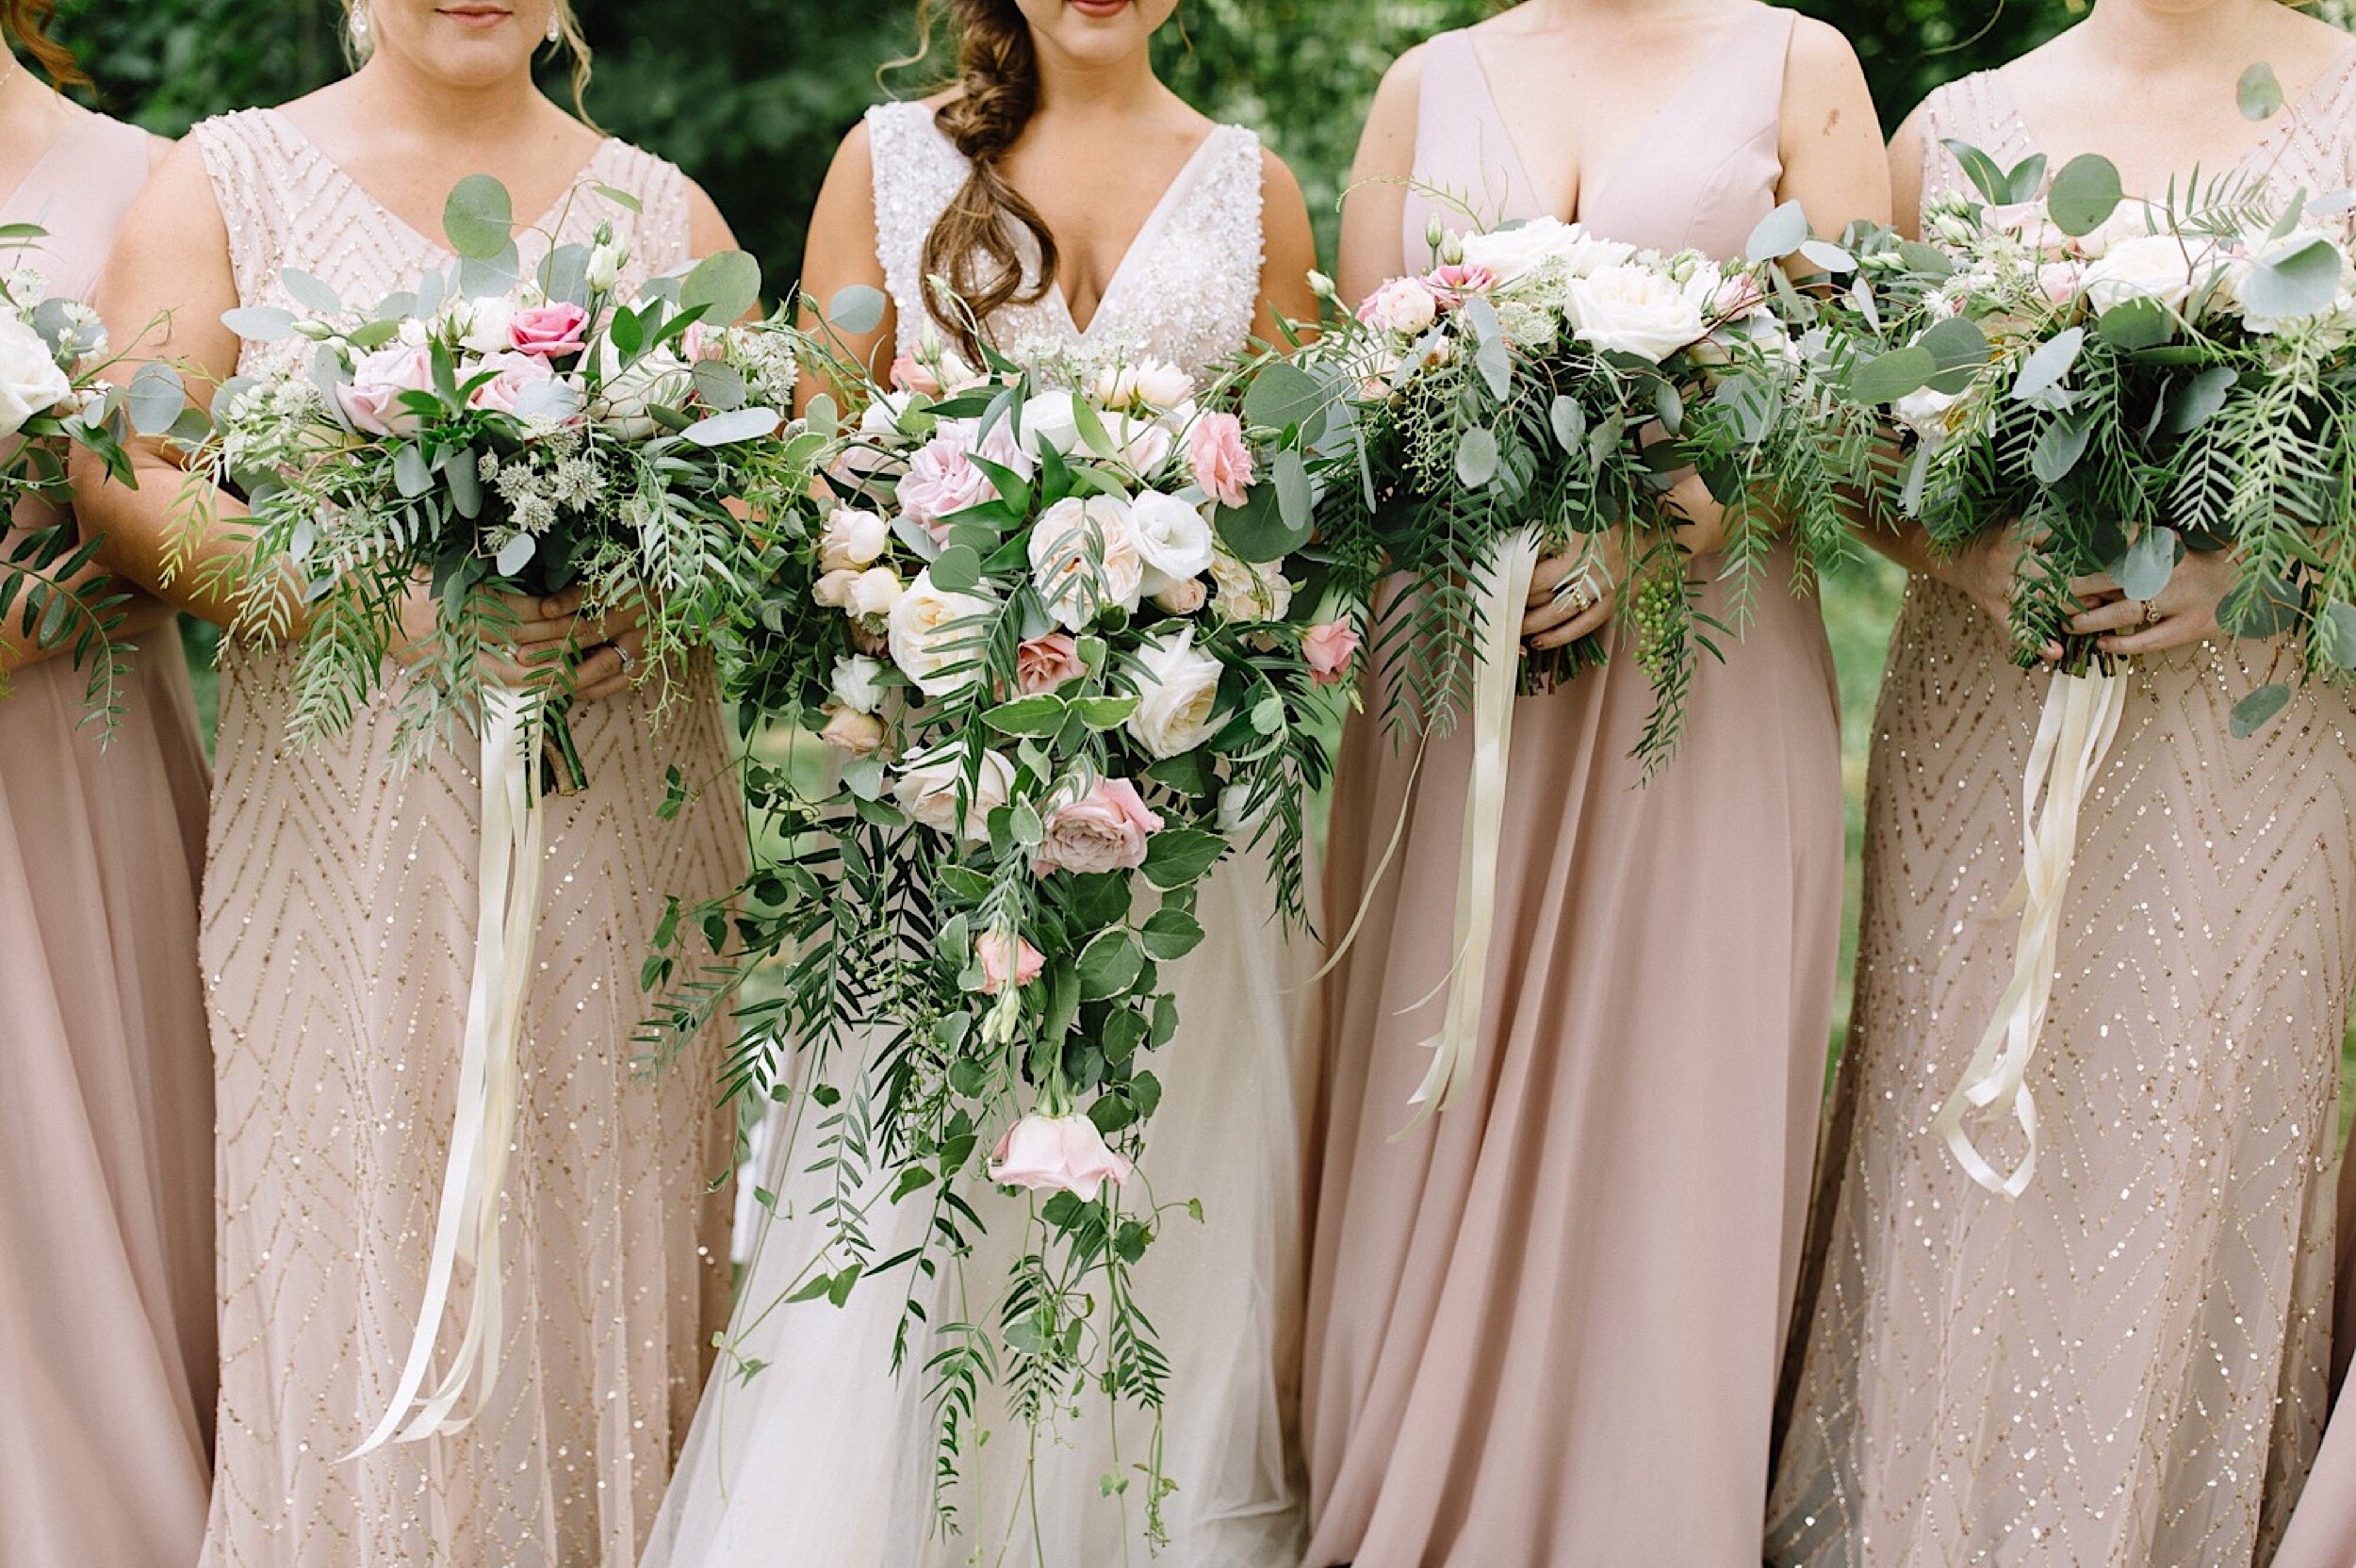 blush and white wedding bouquets